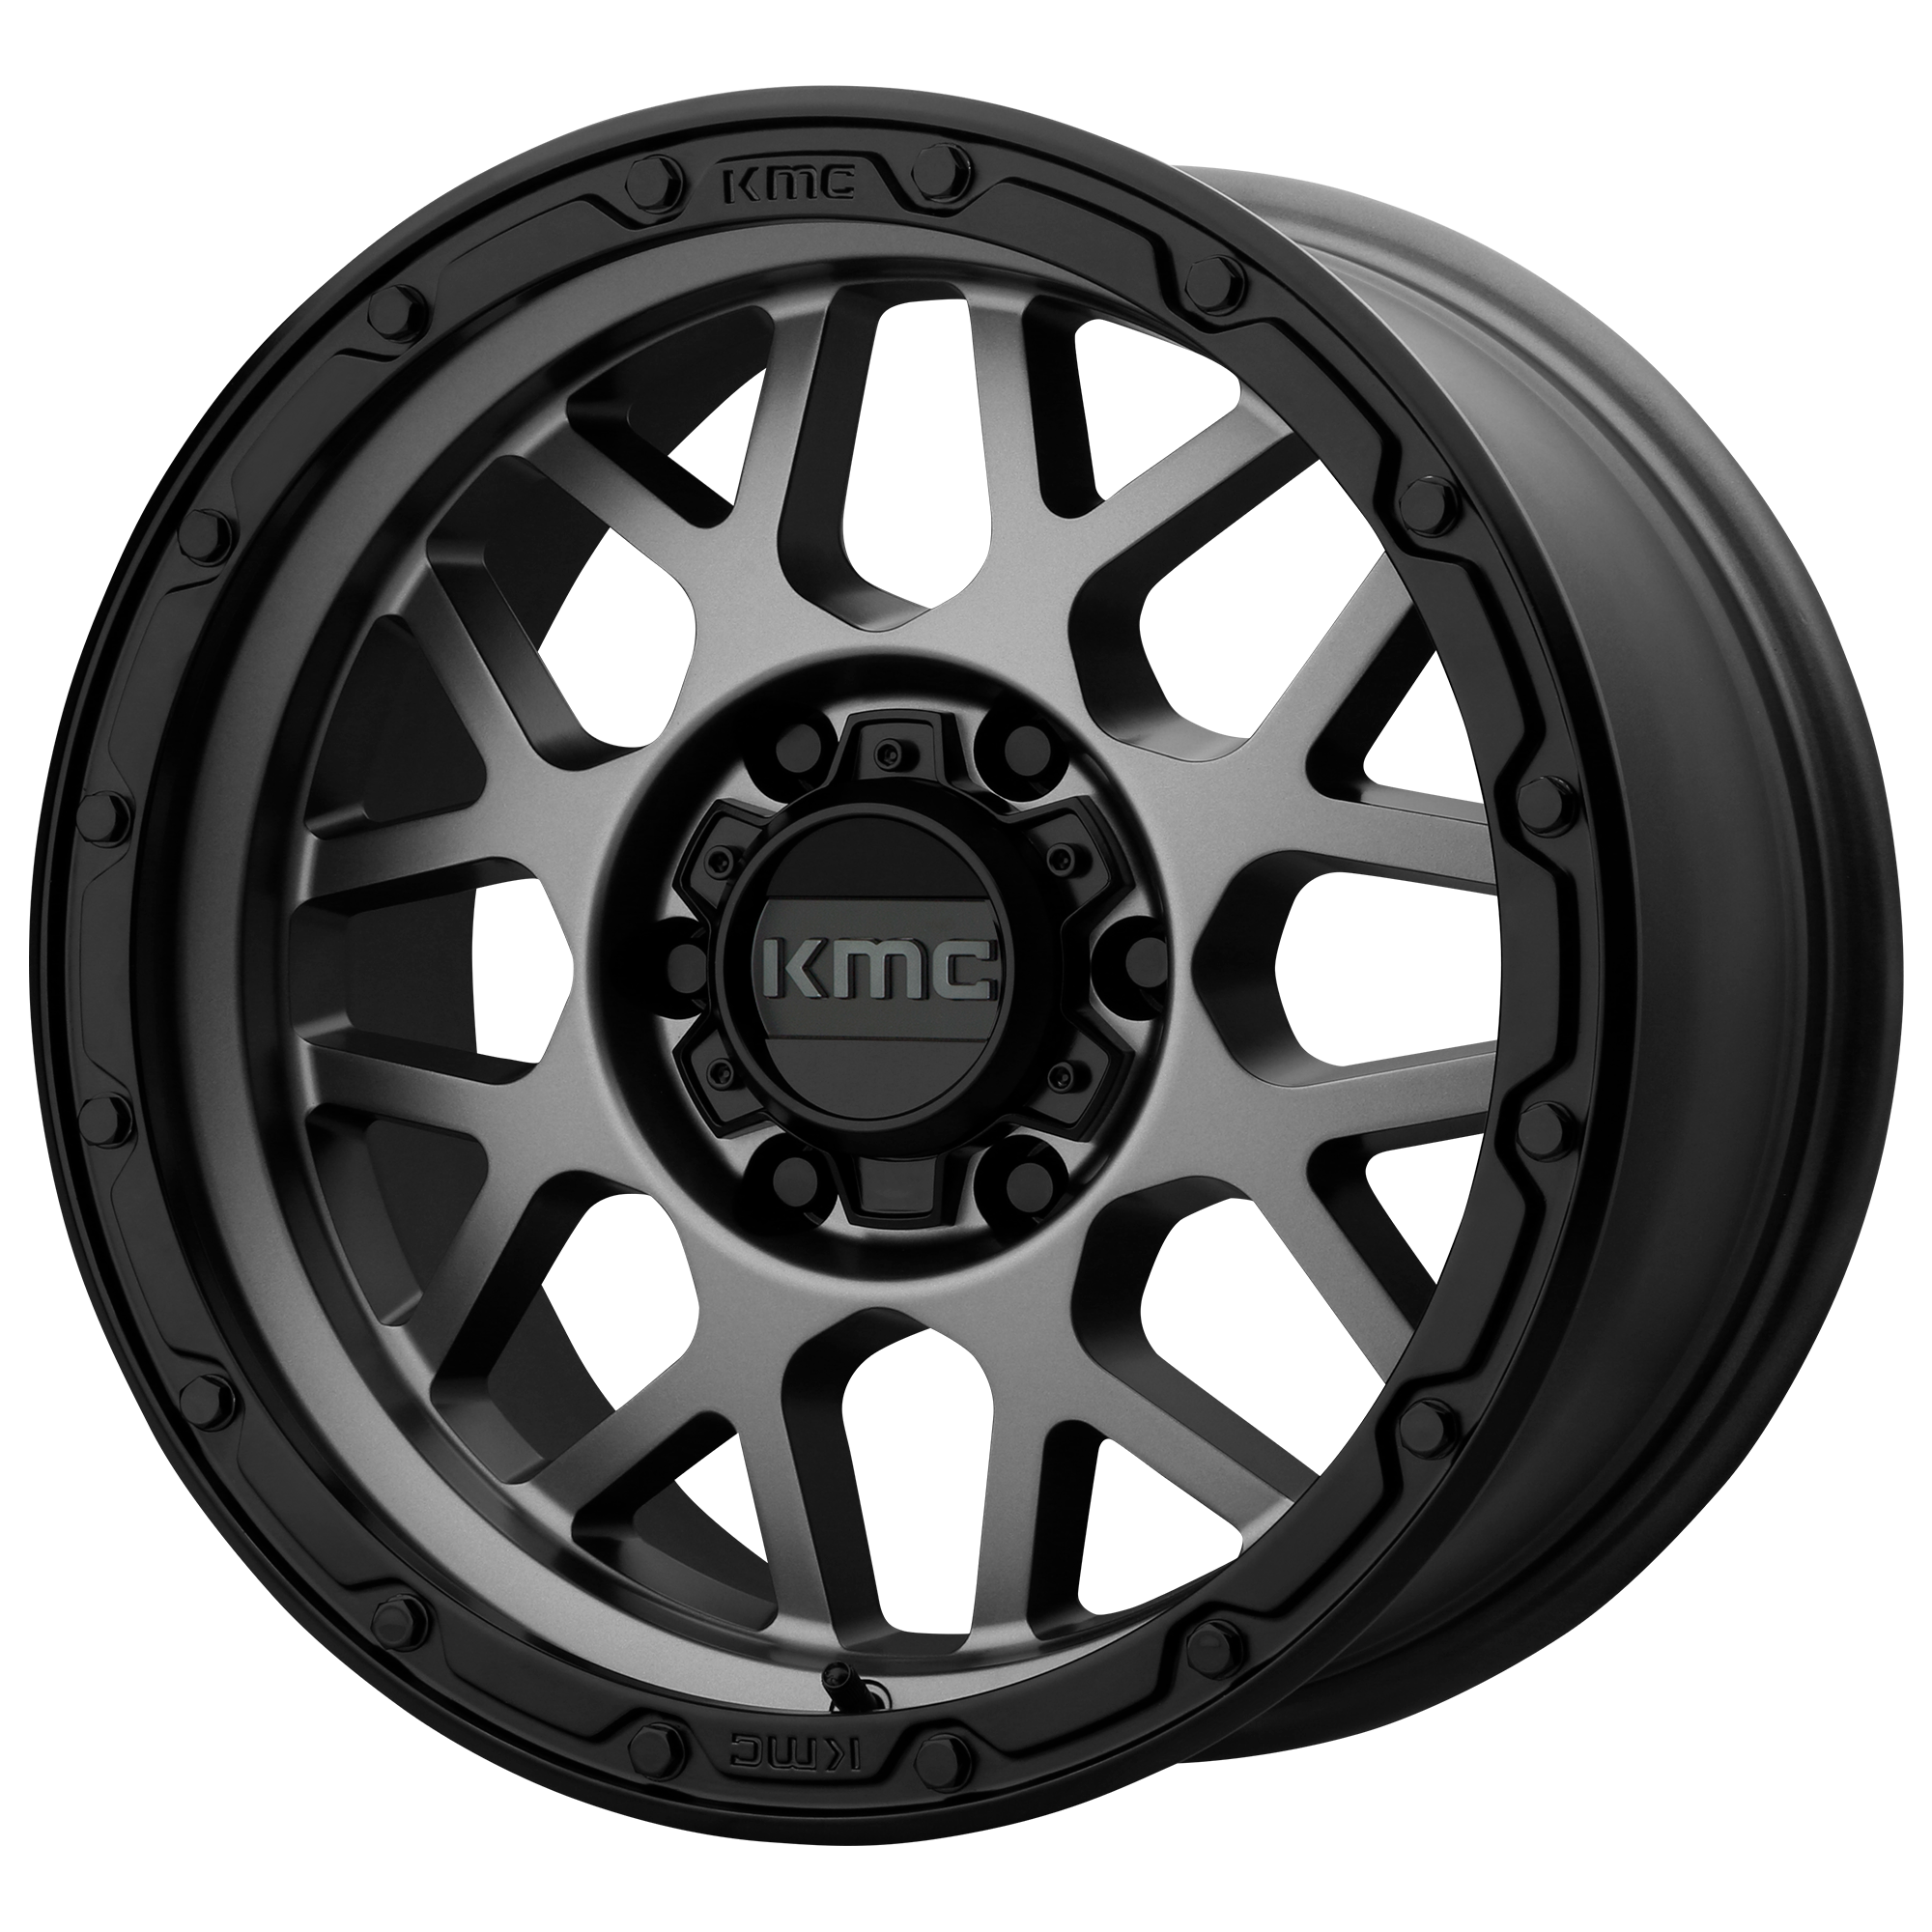 GRENADE OFF-ROAD 20x9 5x127.00 MATTE GRAY W/ MATTE BLACK LIP (18 mm) - Tires and Engine Performance